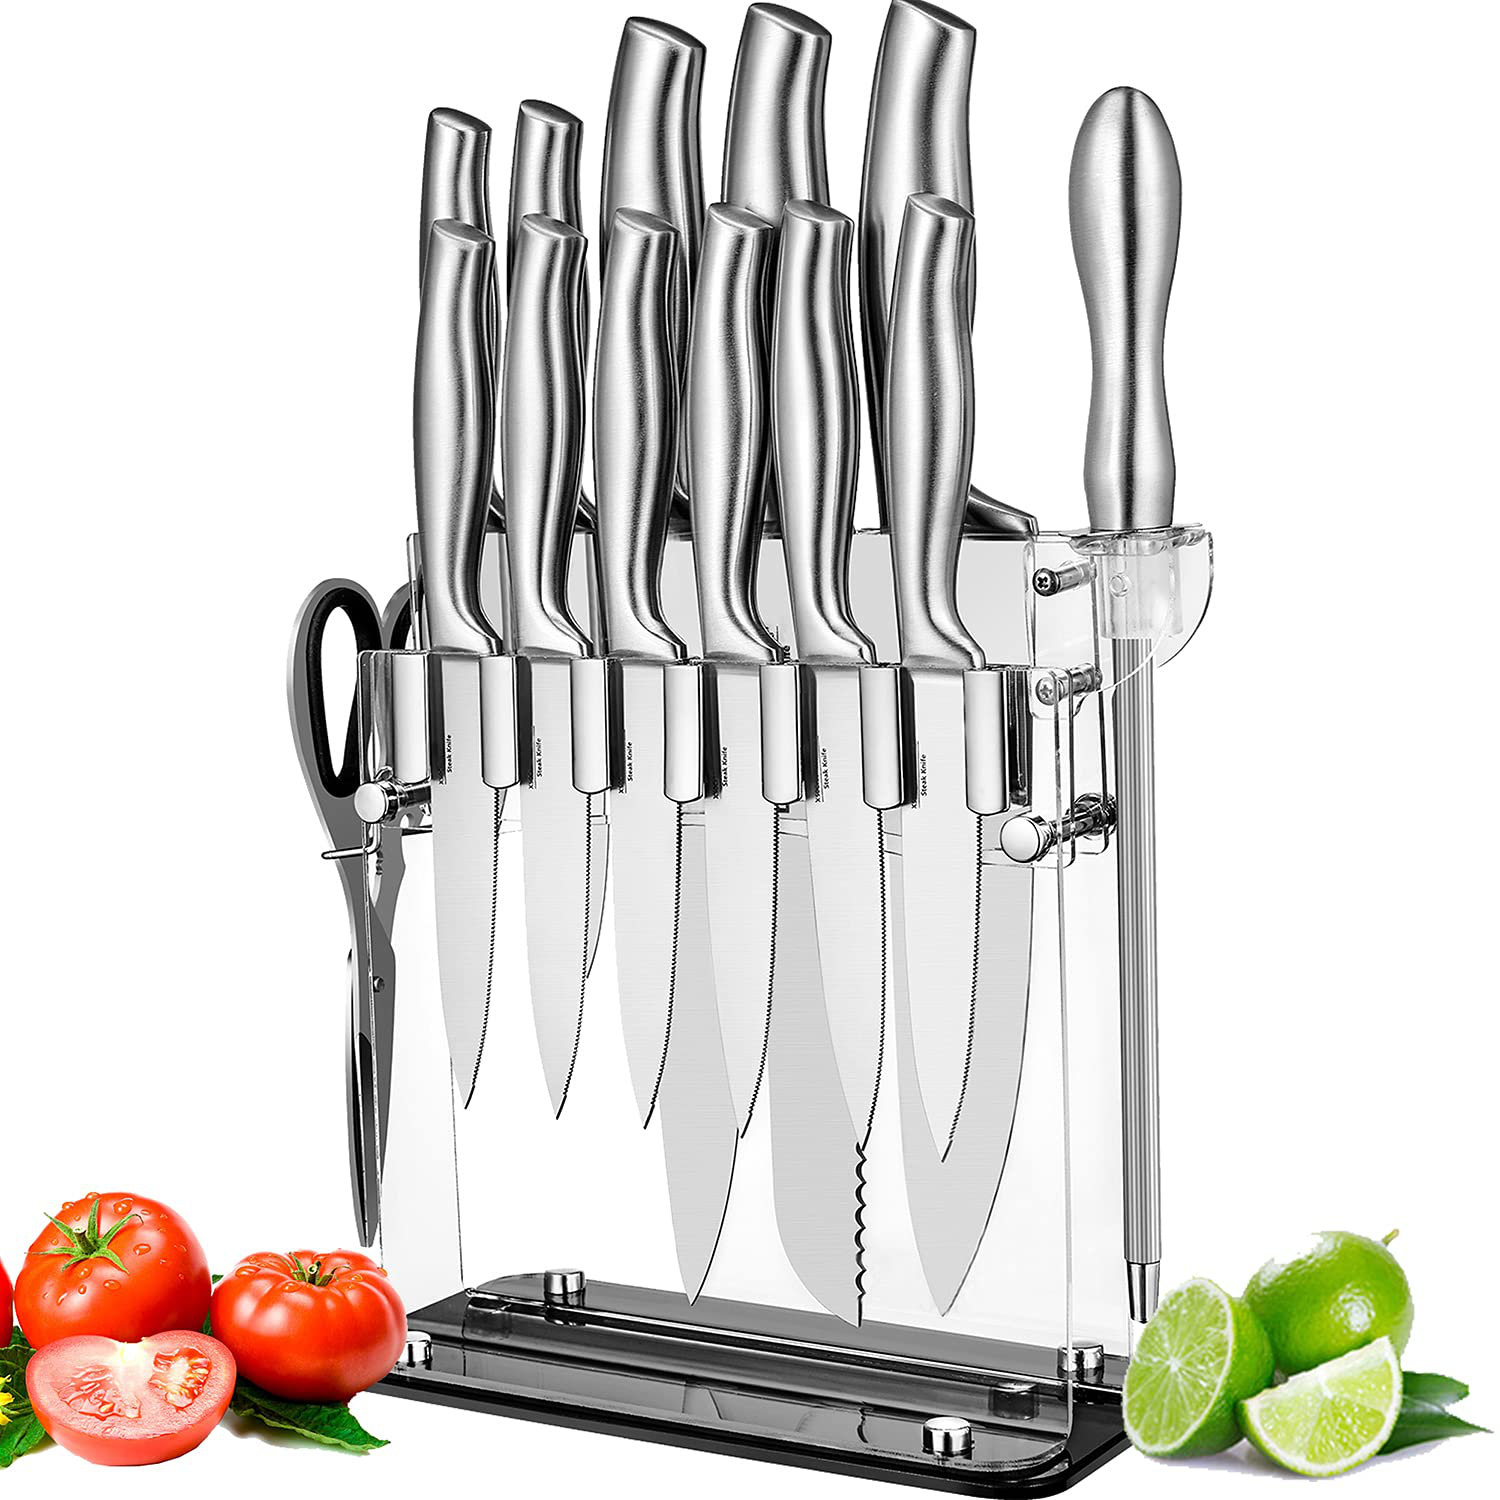 AIHEAL Knife Set, Aiheal 14PCS Stainless Steel Kitchen Knife Set with  Acrylic Knife Stand, No Rust and Super Sharp Cutlery Knife Set in